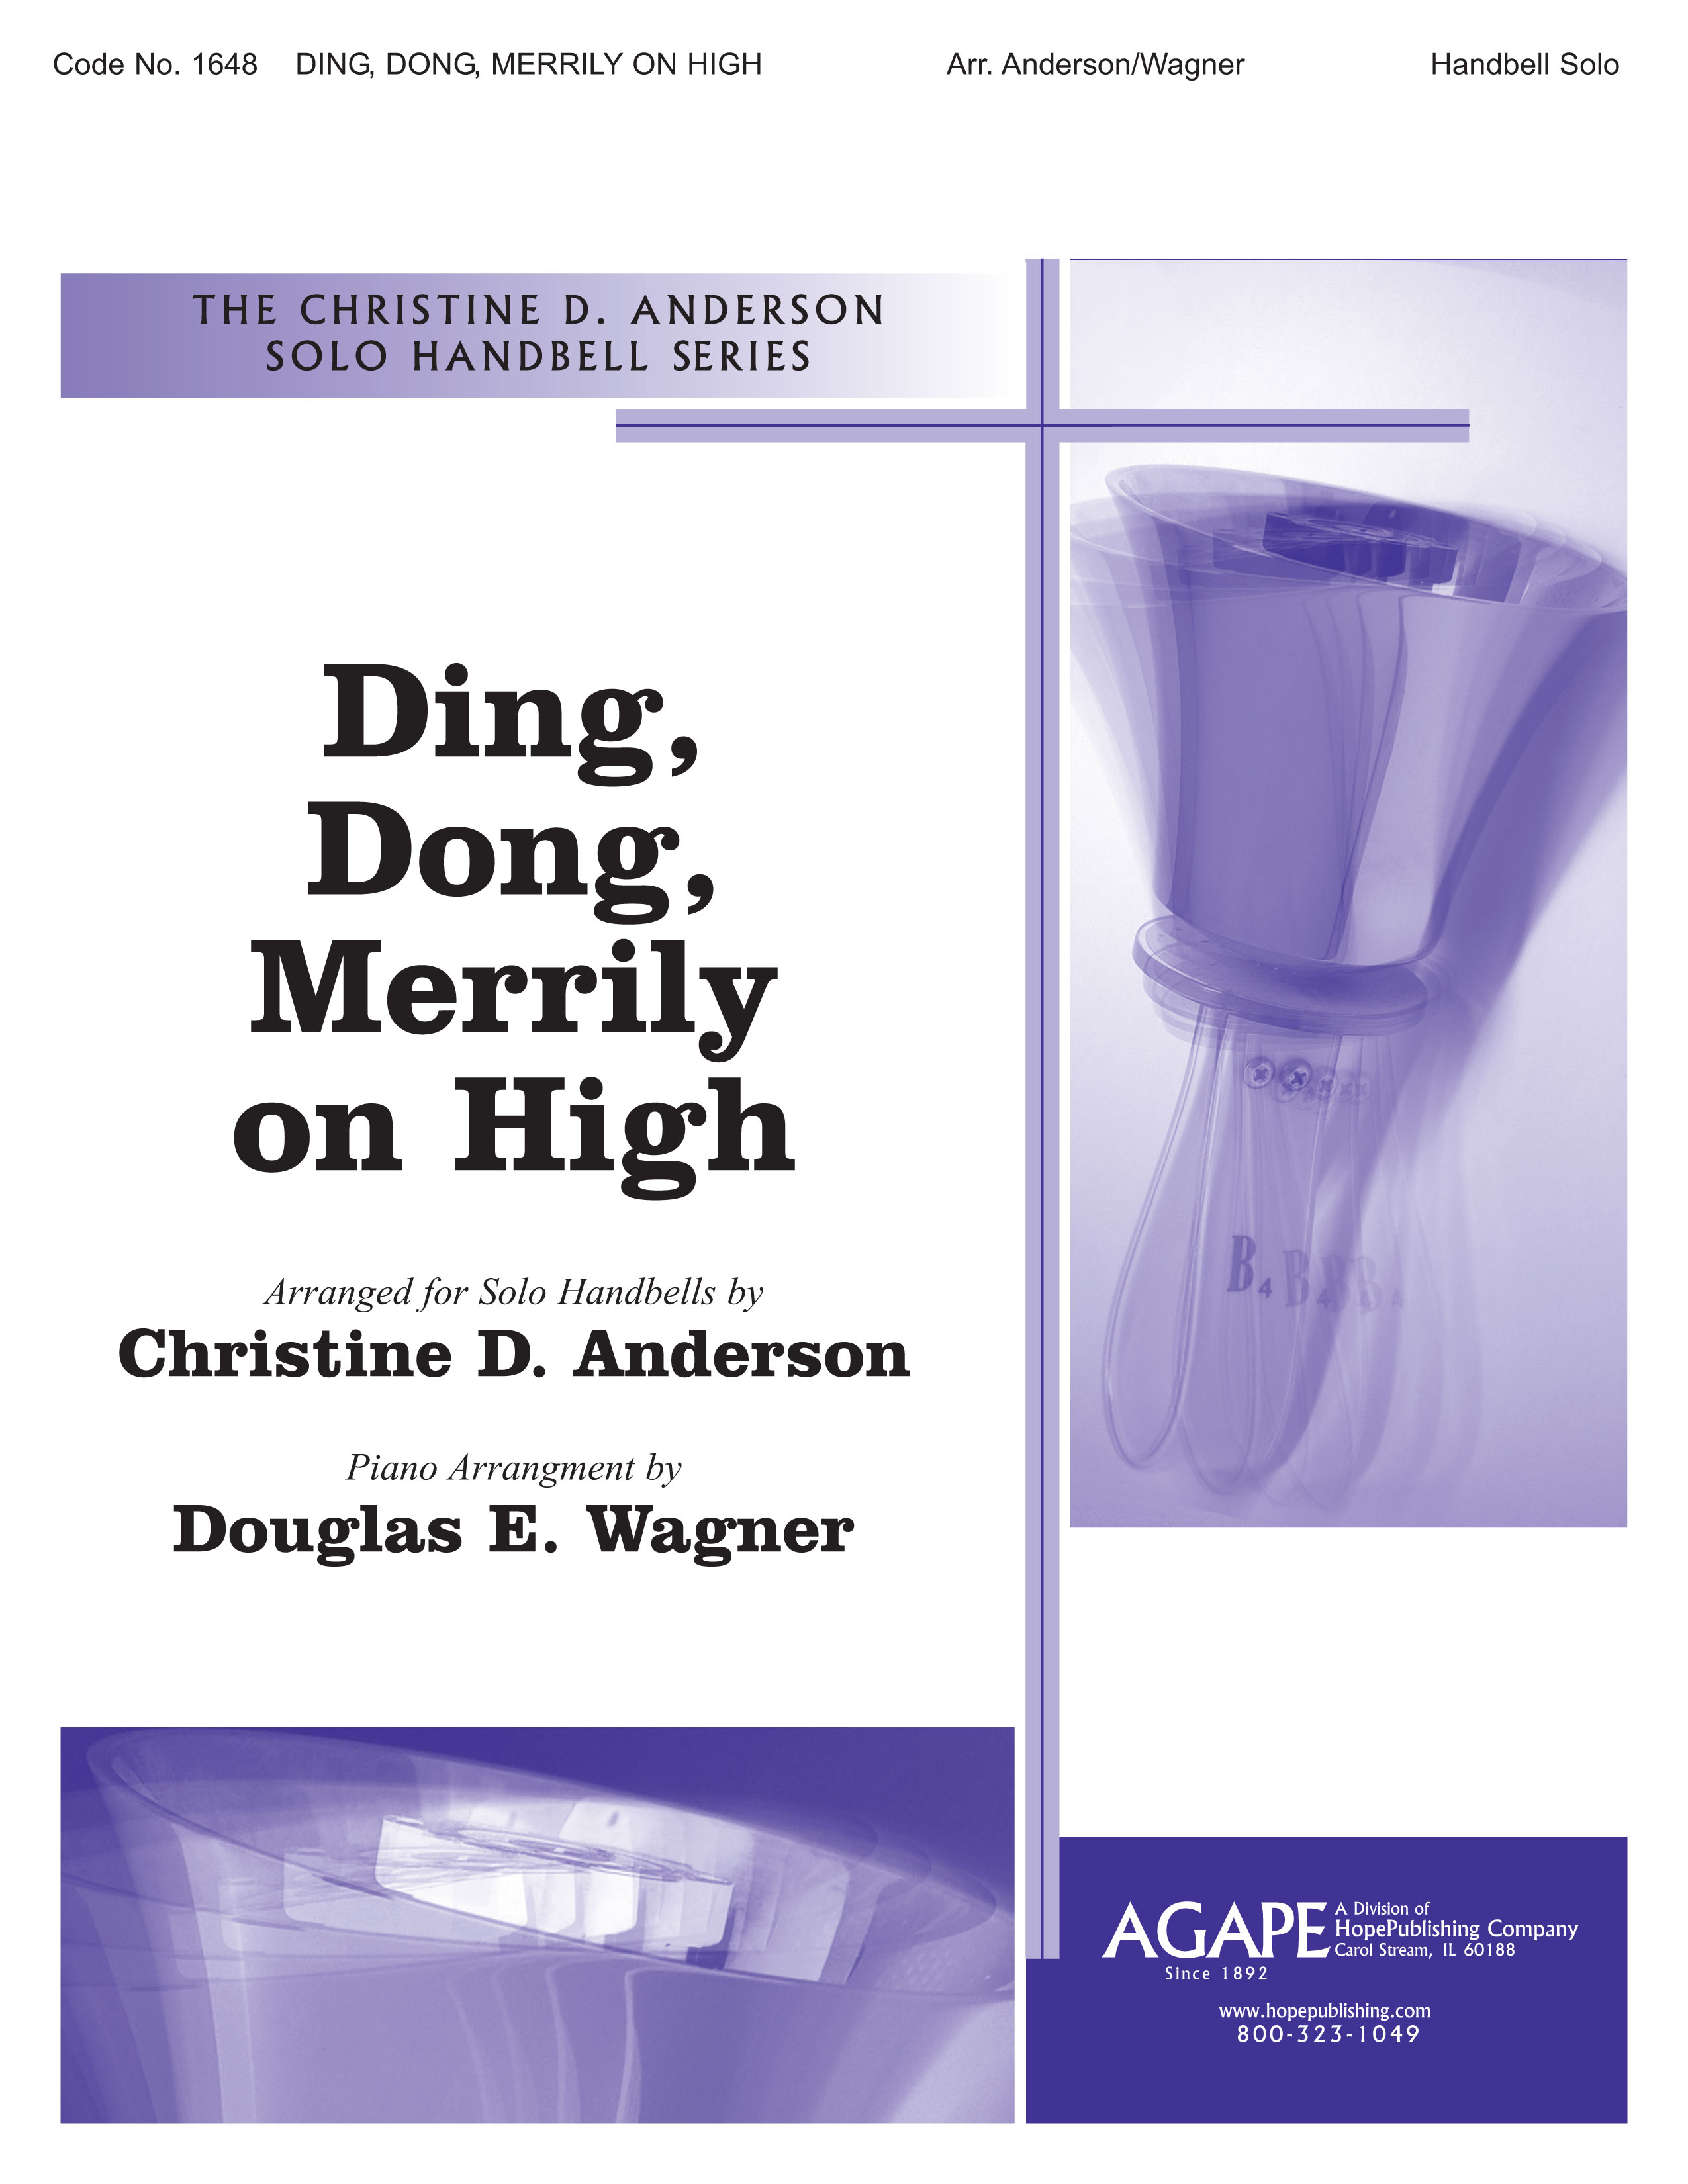 Ding Dong Merrily on High - Handbell Solo Cover Image